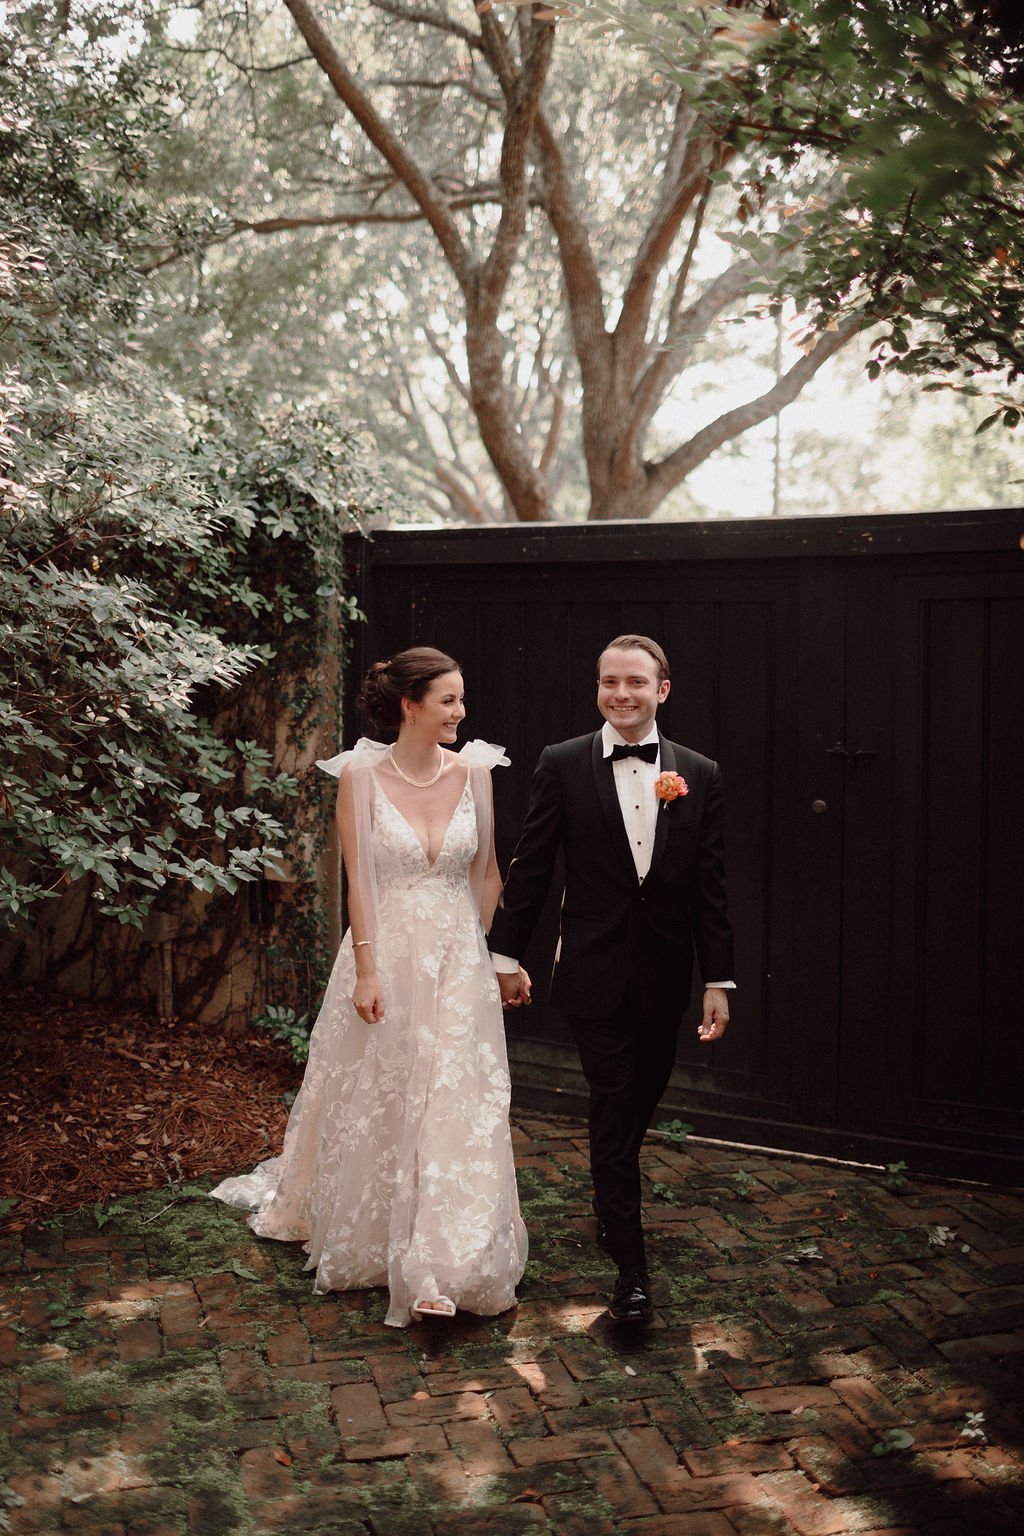 anna-in-the-elsie-gown-by-made-with-love-a-flowy-romantic-modern-lace-wedding-gown-purchased-from-savannah-bridal-shop-ivory-and-beau-7.jpg